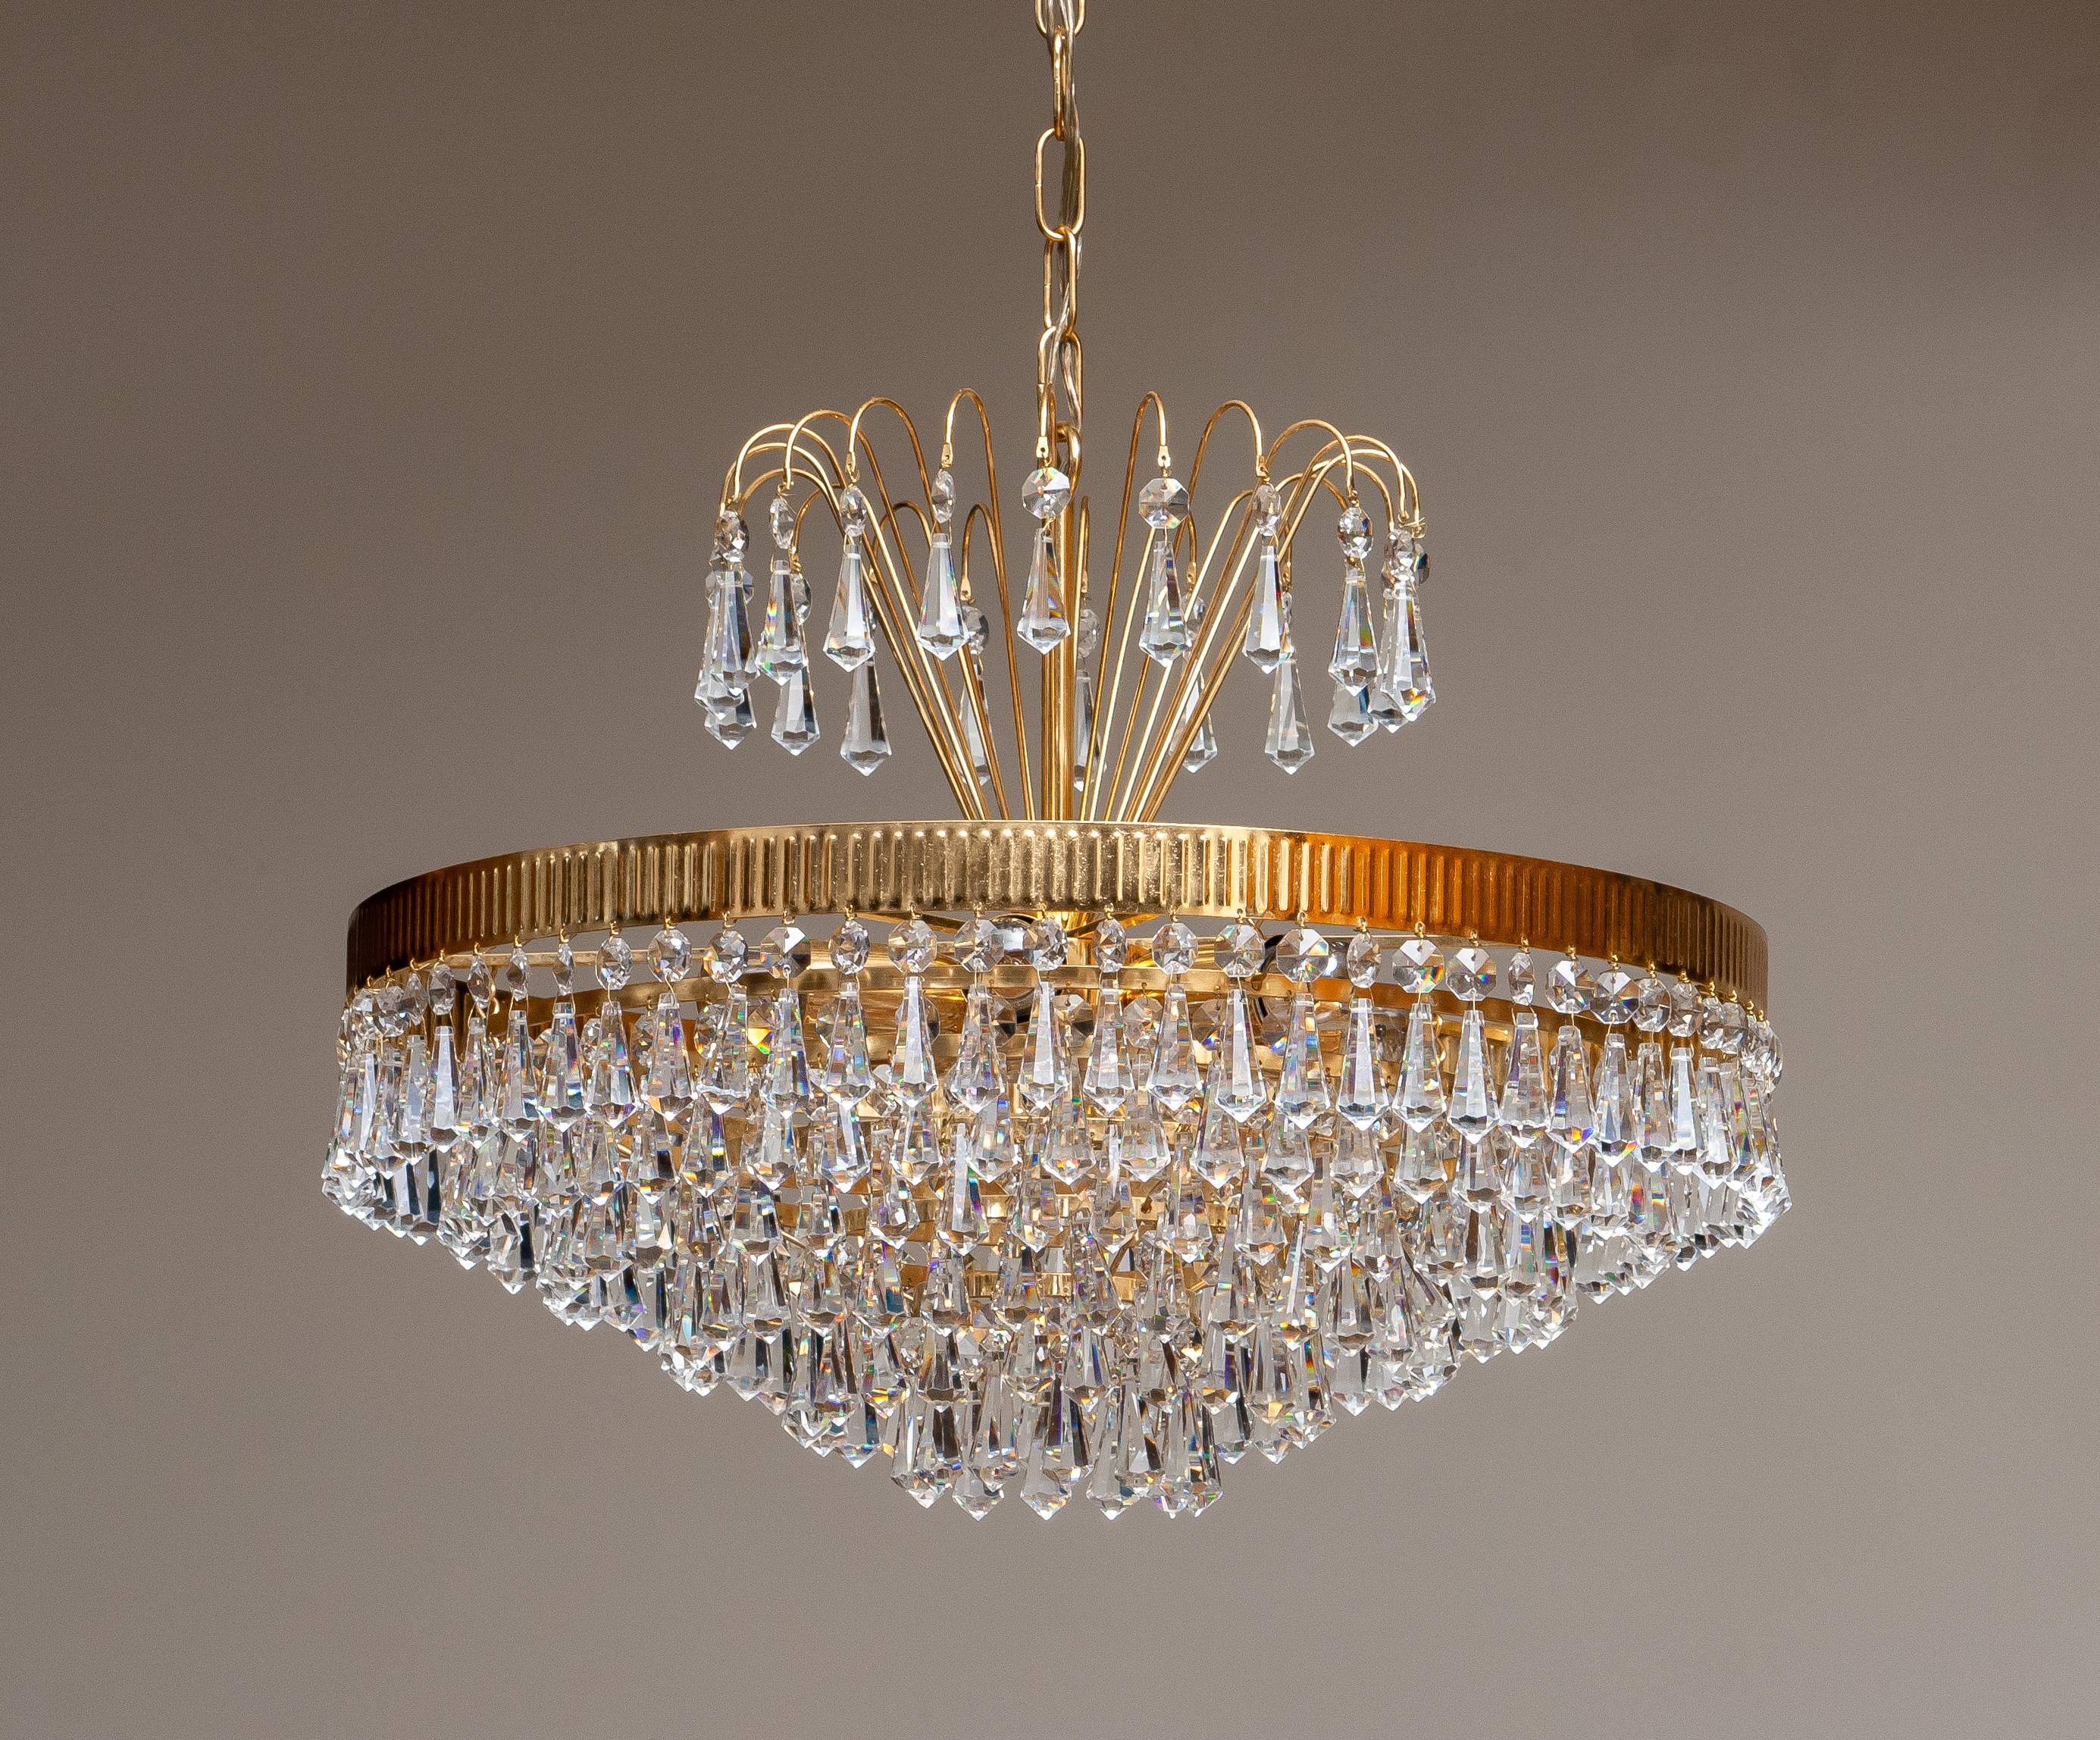 1960s, 24-Carat Gold-Plated and Faceted Crystal Chandelier by Rejmyre, Sweden 2